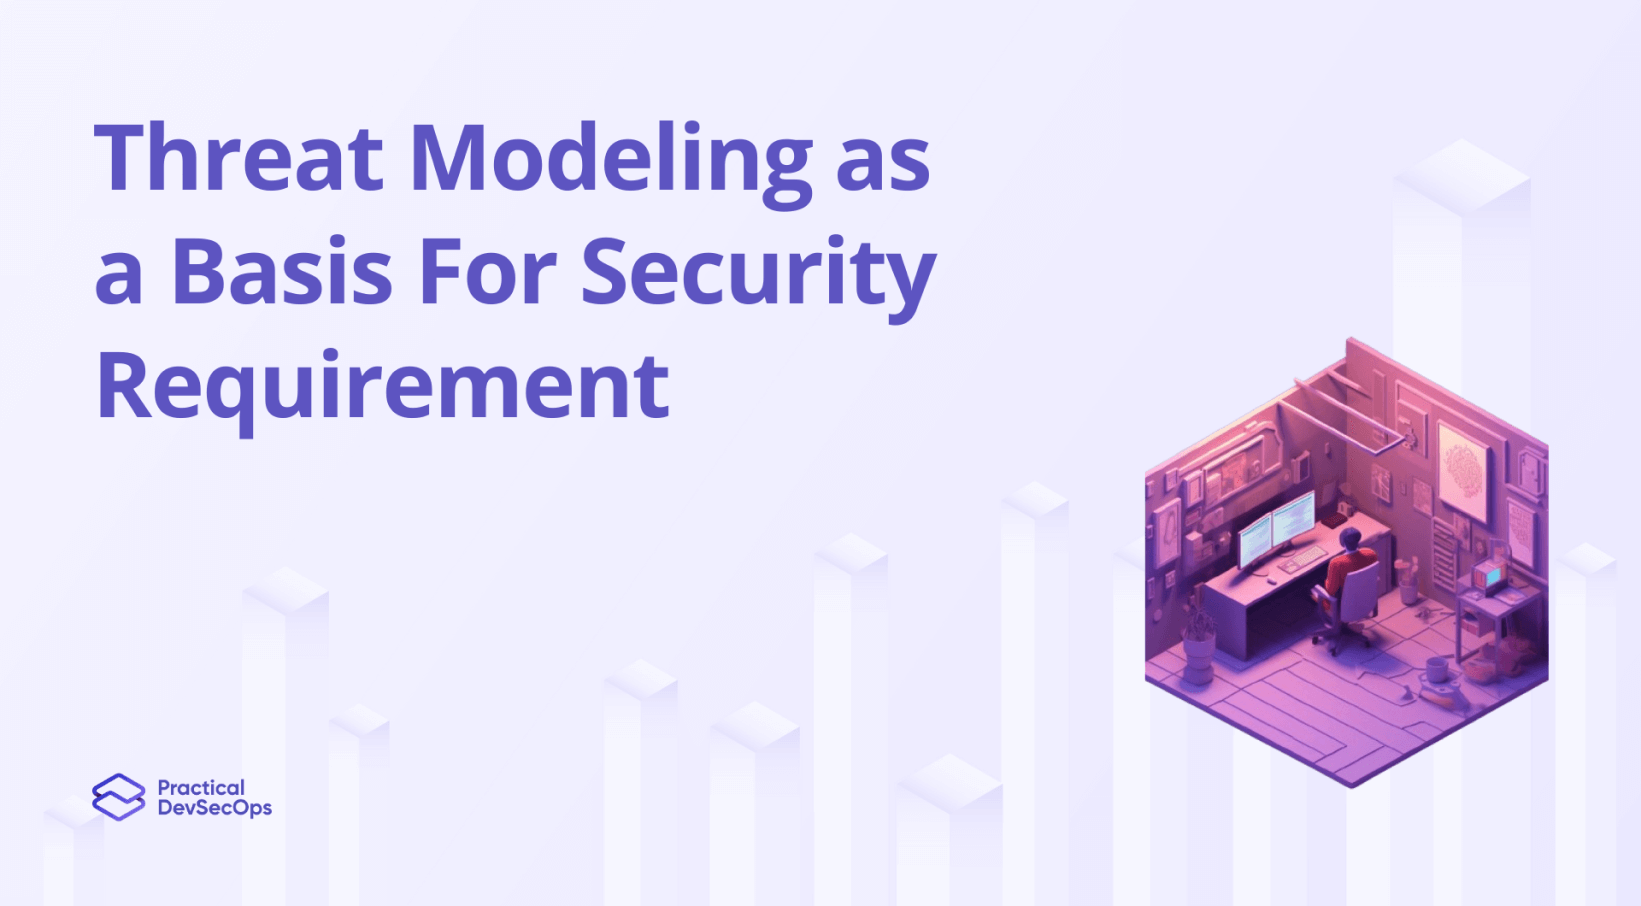 Threat Modeling as a Basis for Security Requirement